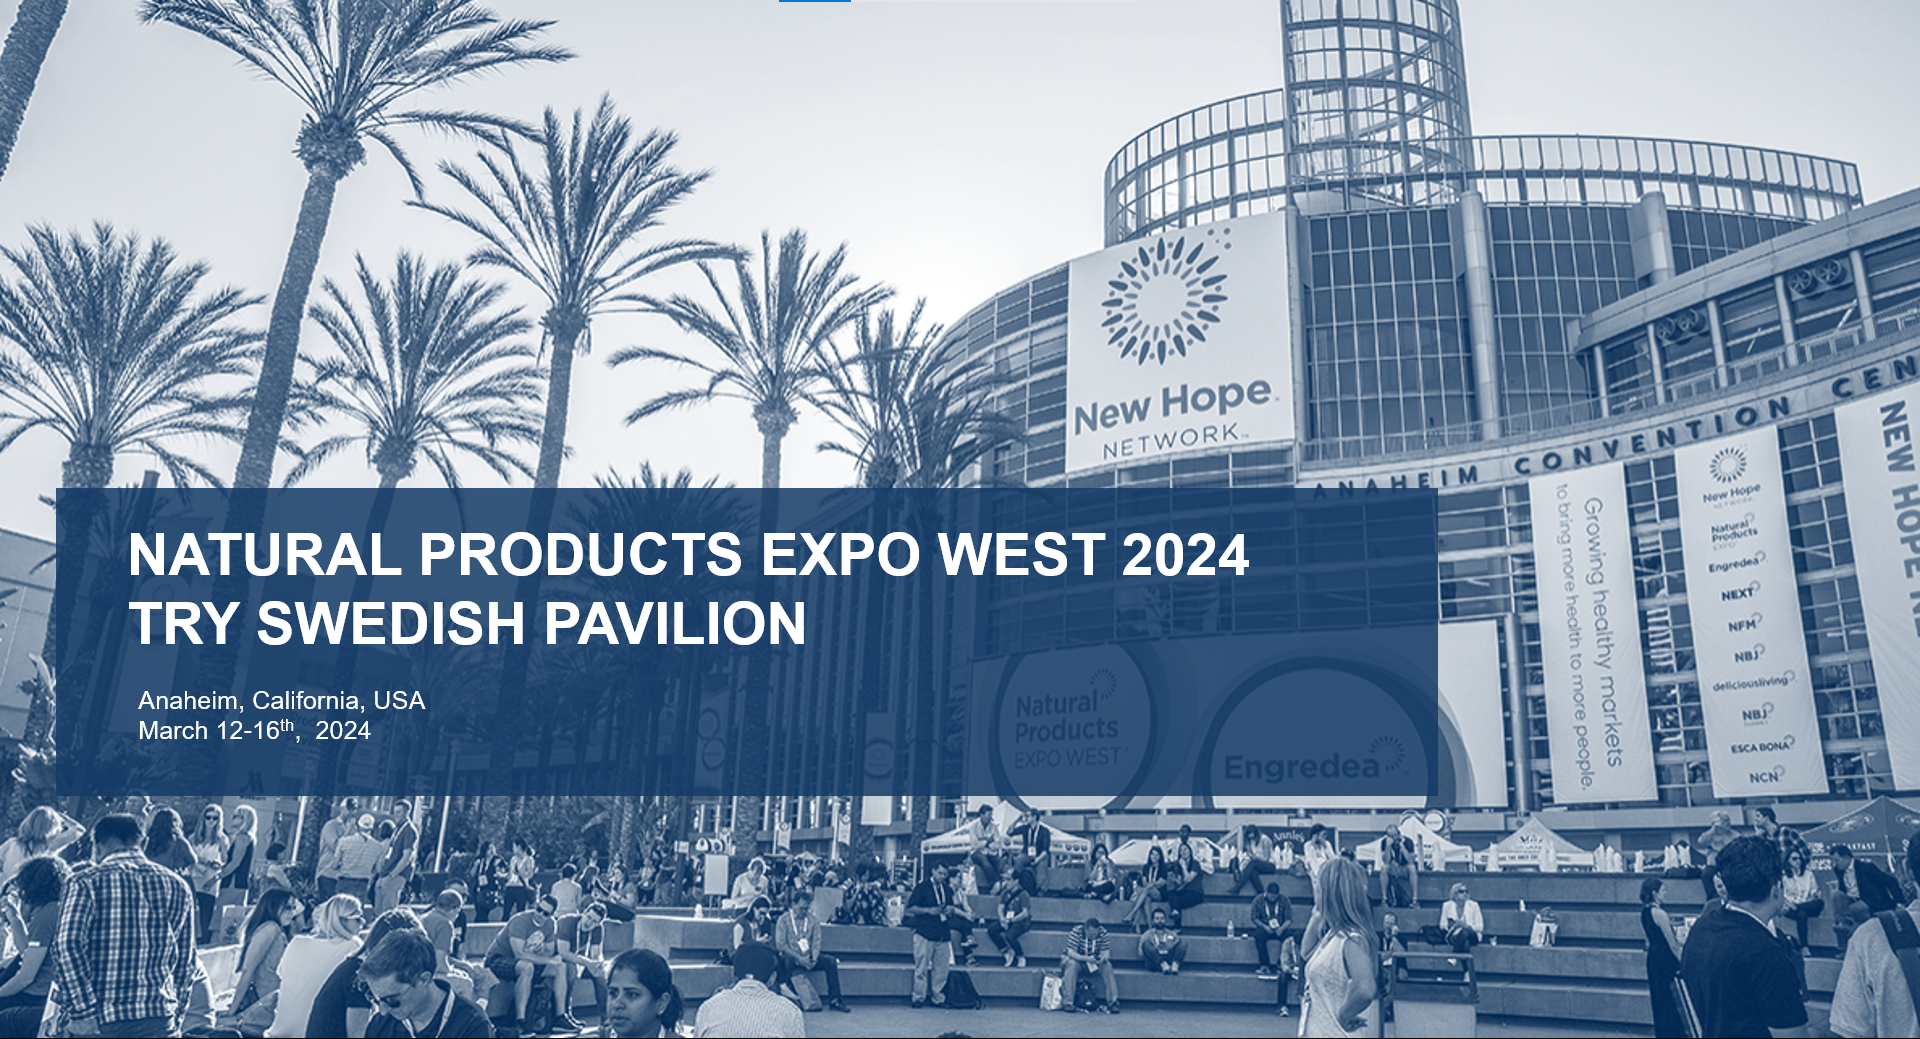 Header image for Try Swedish Pavilion at Natural Products Expo West 2024